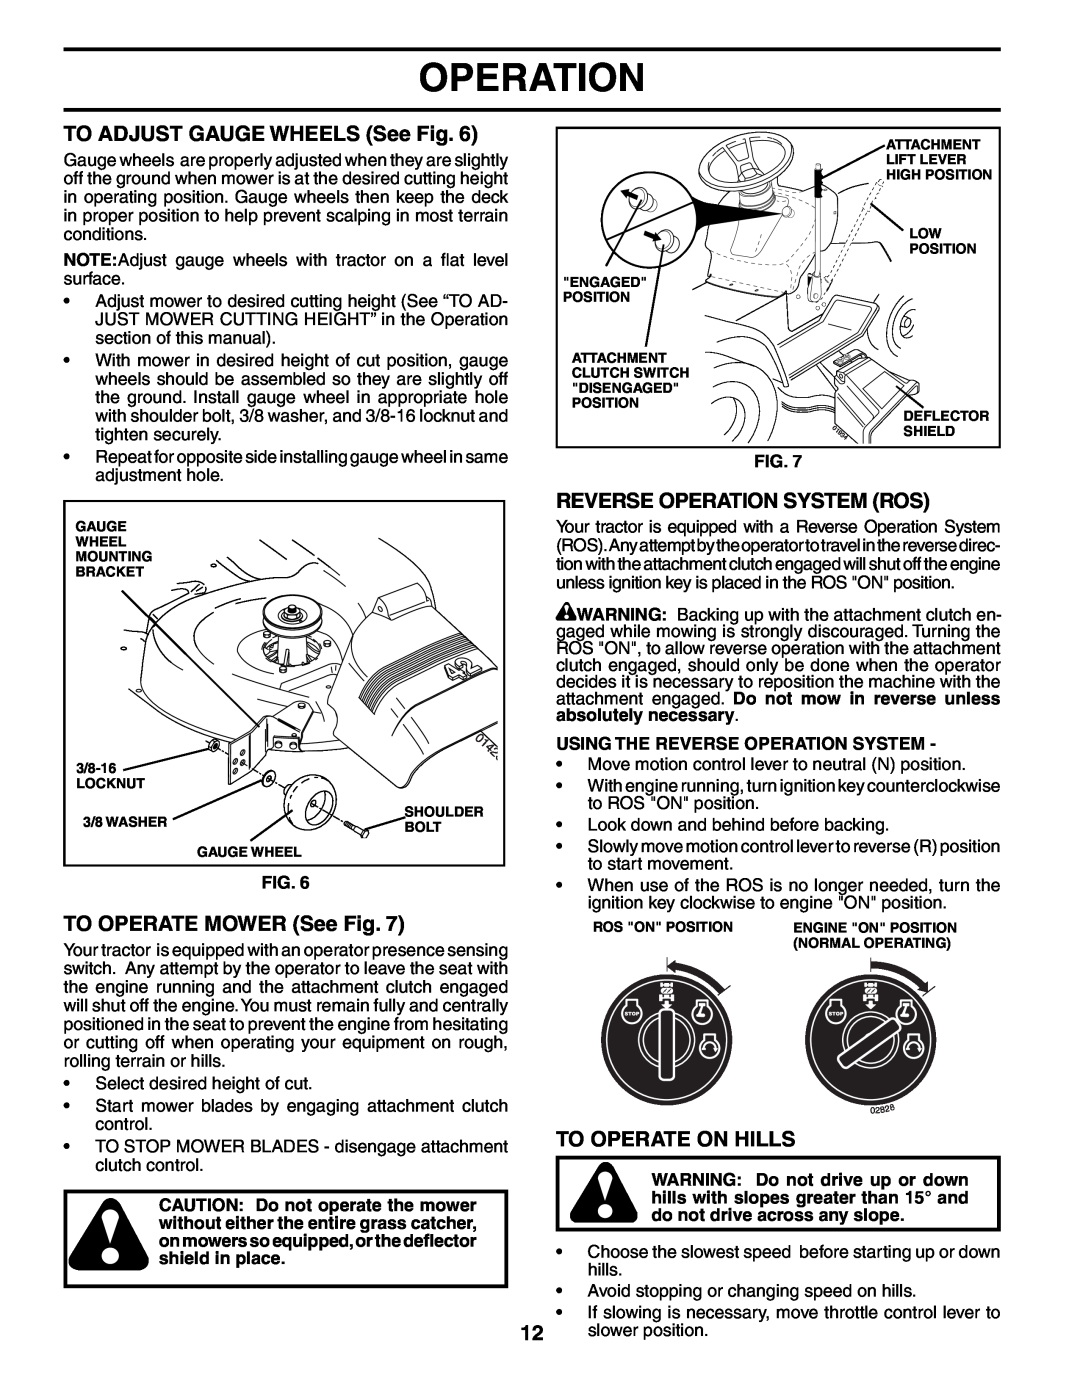 Husqvarna LTH1542 owner manual TO ADJUST GAUGE WHEELS See Fig, TO OPERATE MOWER See Fig, Reverse Operation System Ros 